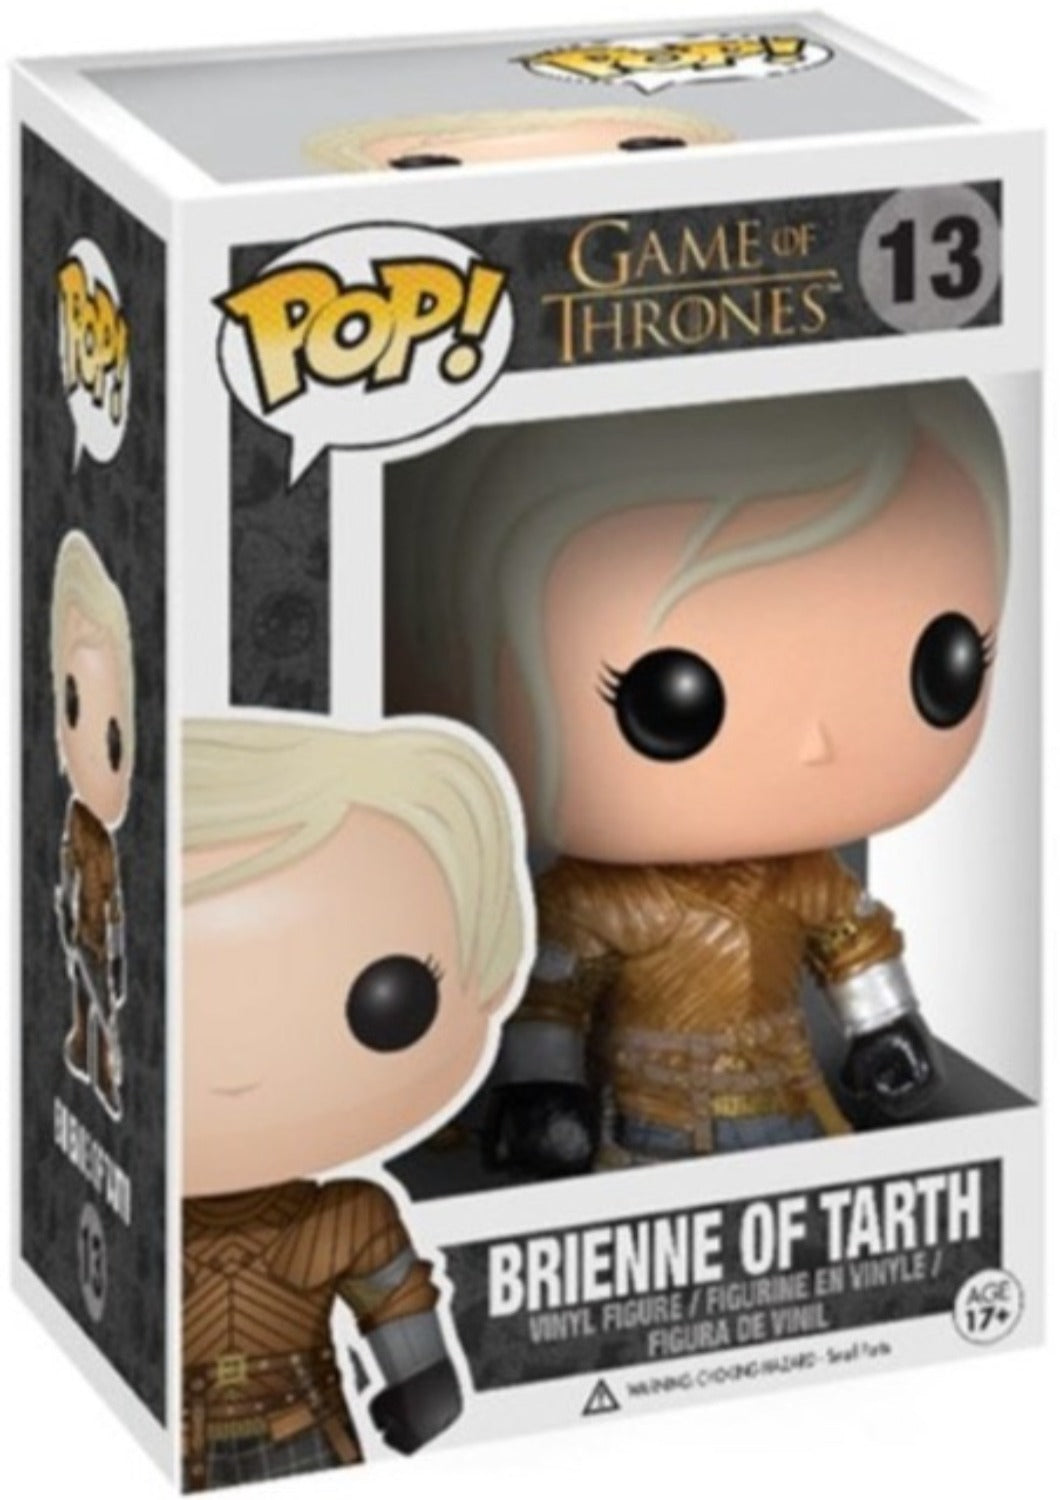 FUNKO POP! BRIENNE OF TARTH 13 GAME OF THRONES - Anotoys Collectibles